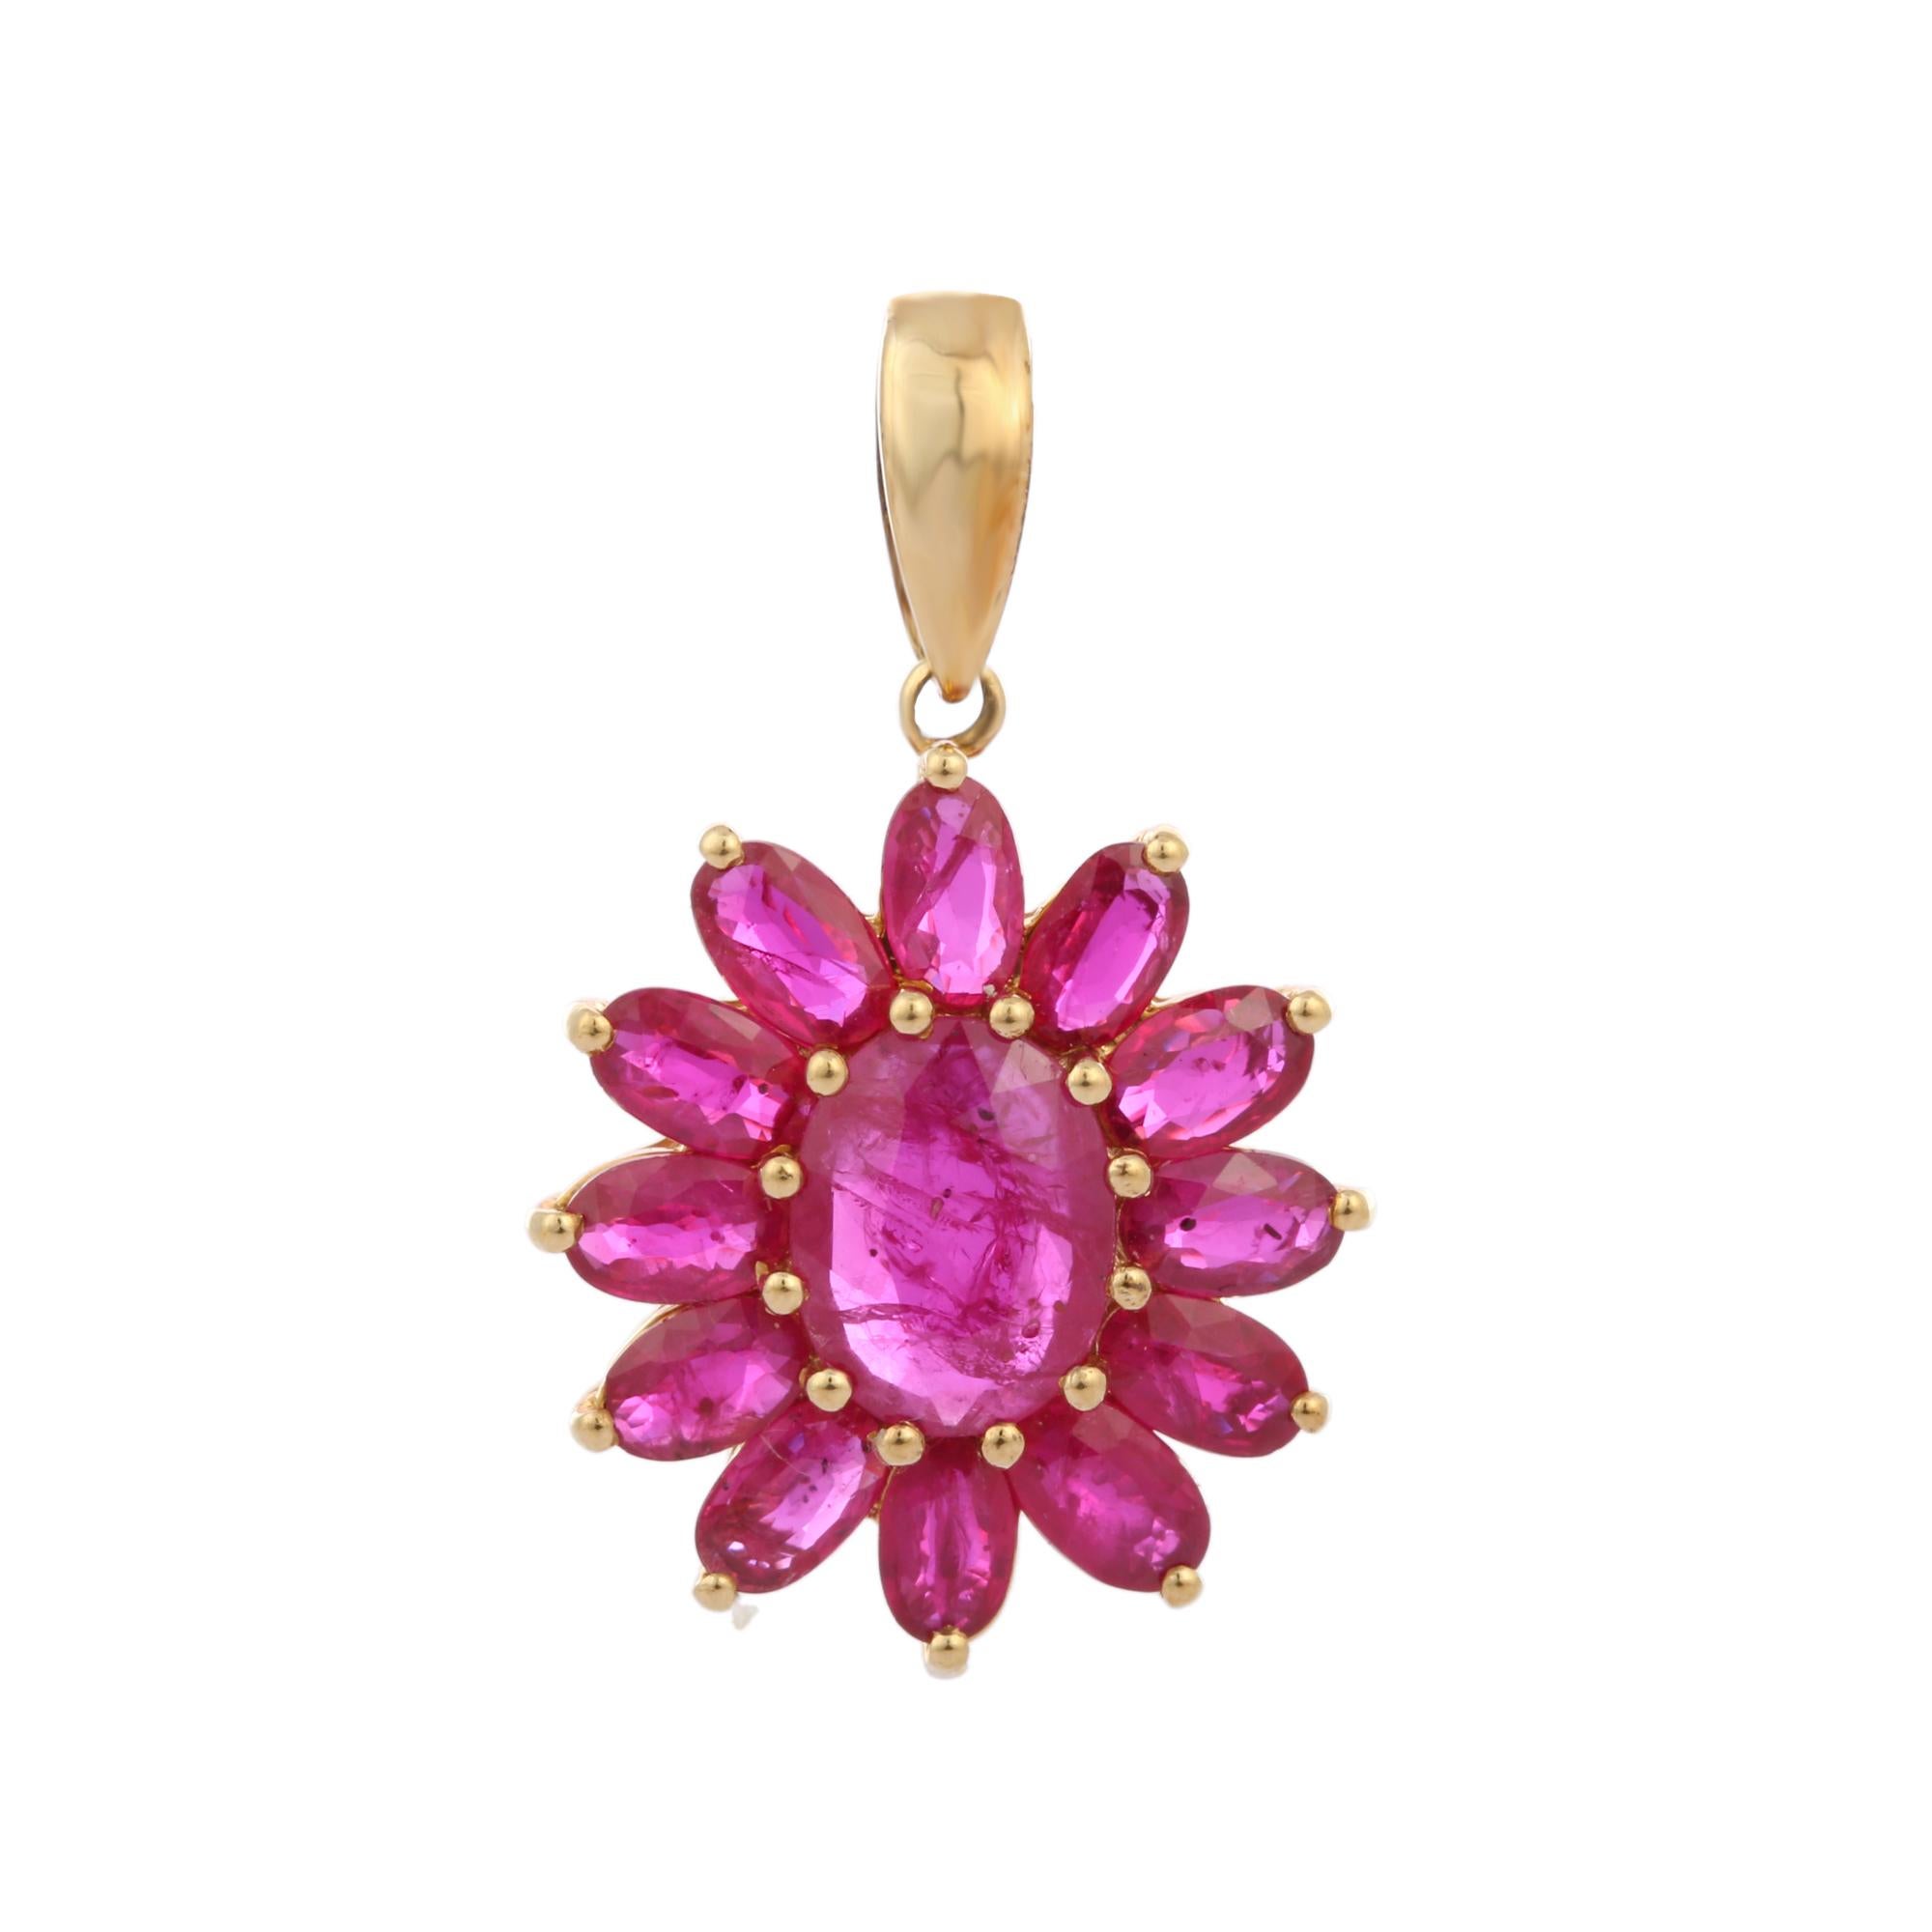 Natural Ruby Gemstone Cluster Flower Pendant in 14K Gold. It has a oval cut ruby that completes your look with a decent touch. Pendants are used to wear or gifted to represent love and promises. It's an attractive jewelry piece that goes with every